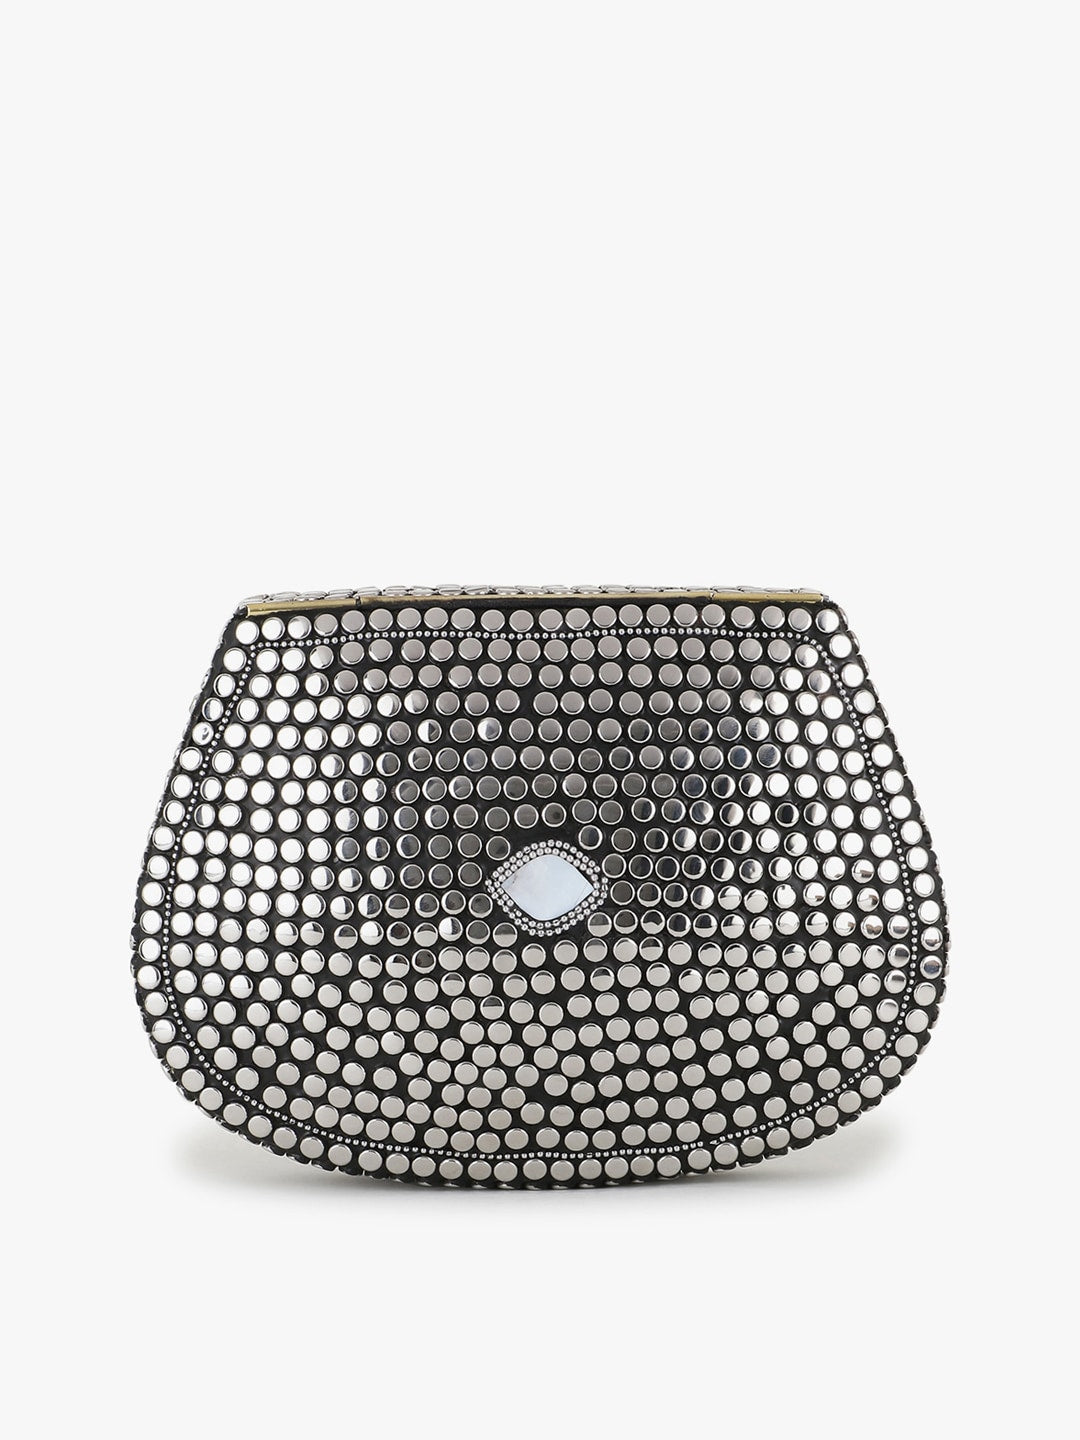 Anekaant Silver-Toned & Black Embellished Half Moon Clutch - Distacart